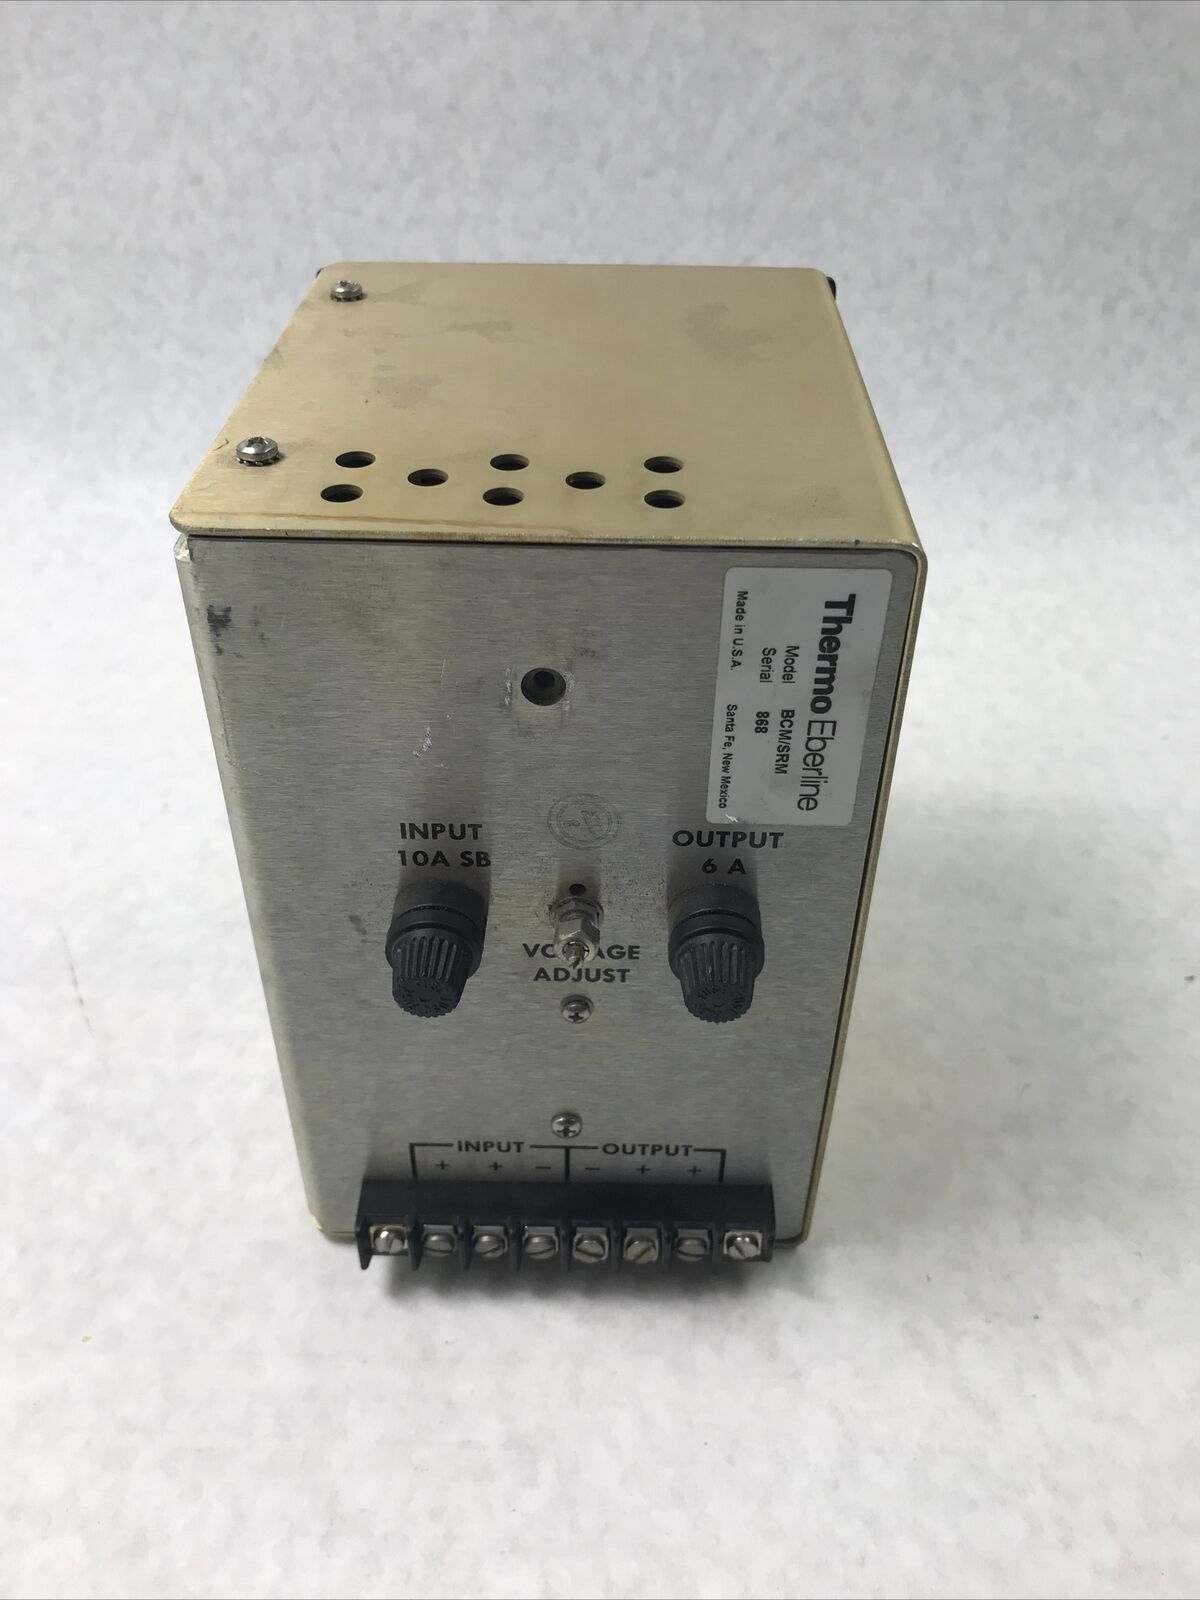 Thermo Eberline BCM/SRM Power Supply Electrical Battery